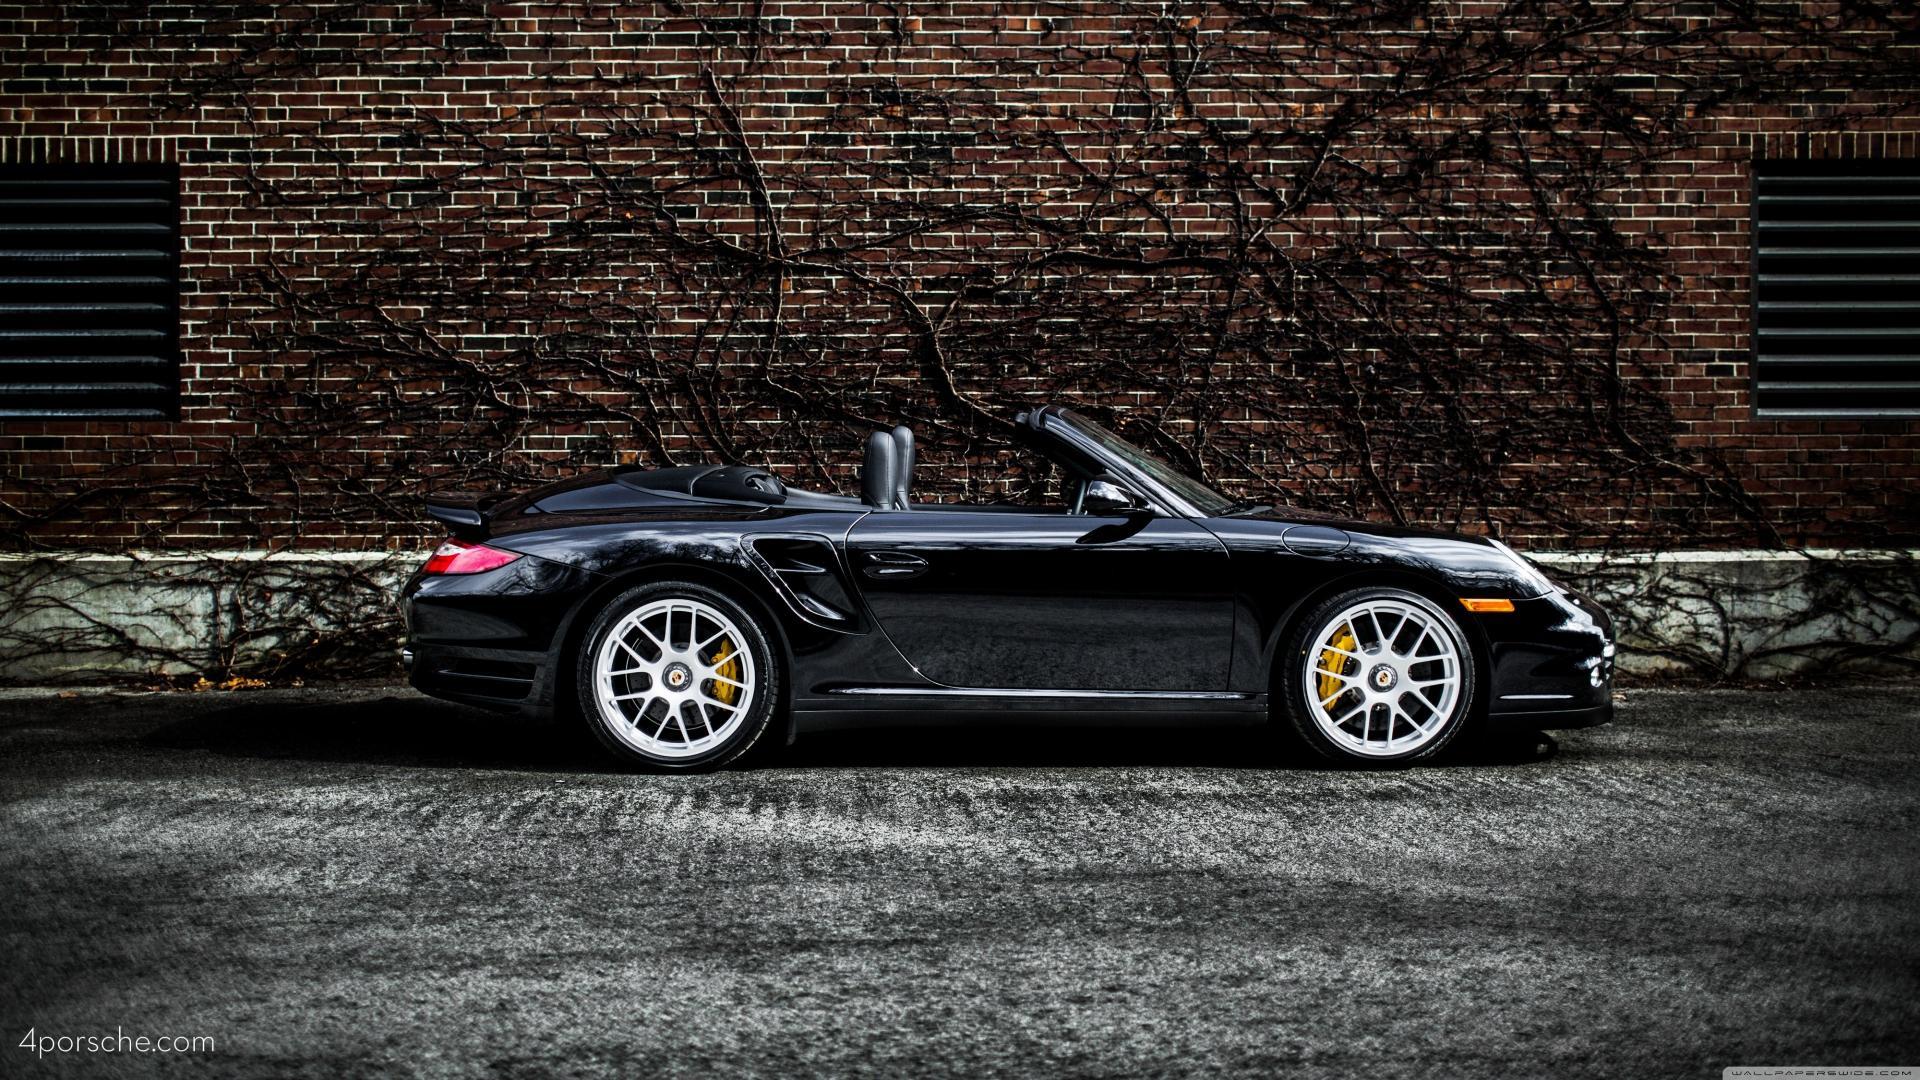 Cars turbo porsche cabriolet Wallpapers